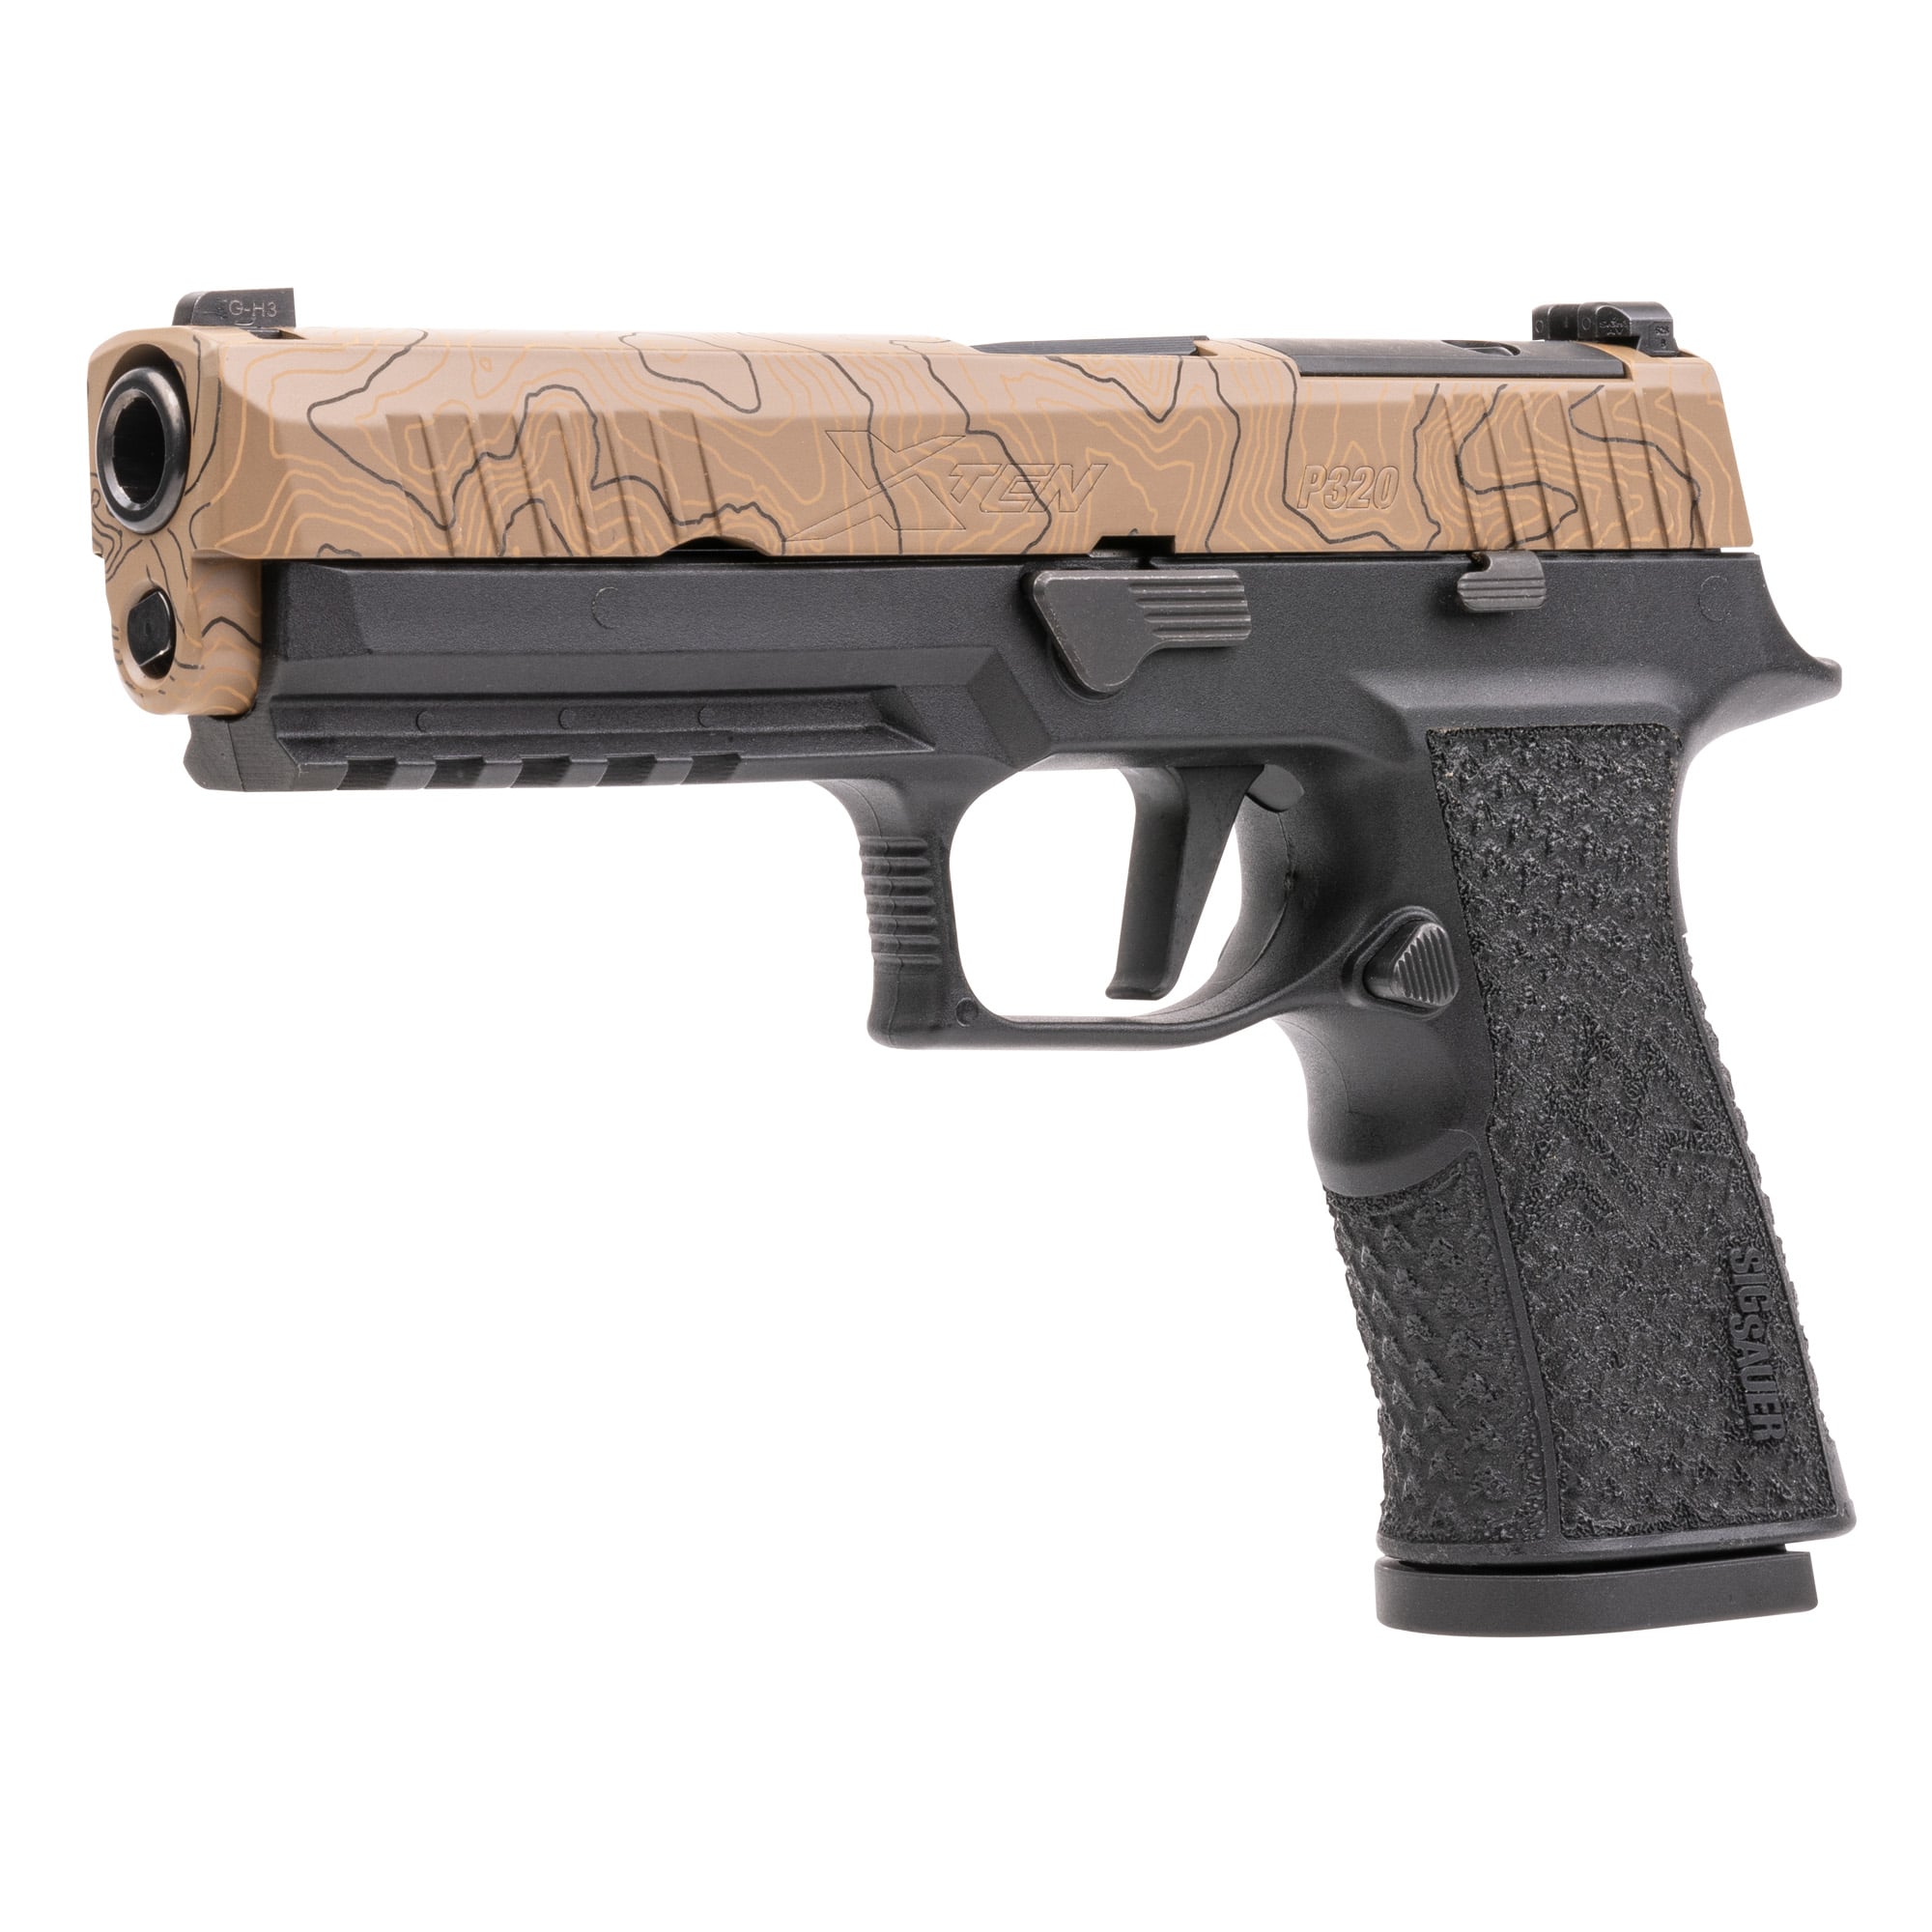 https://cityarsenal.com/product/sig-sauer-p320-xten-endure-full-size-10mm-flat-dark-earth-slide-with-topographic-laser-etched-pattern-320x5-10-cxr3-cw-r2/